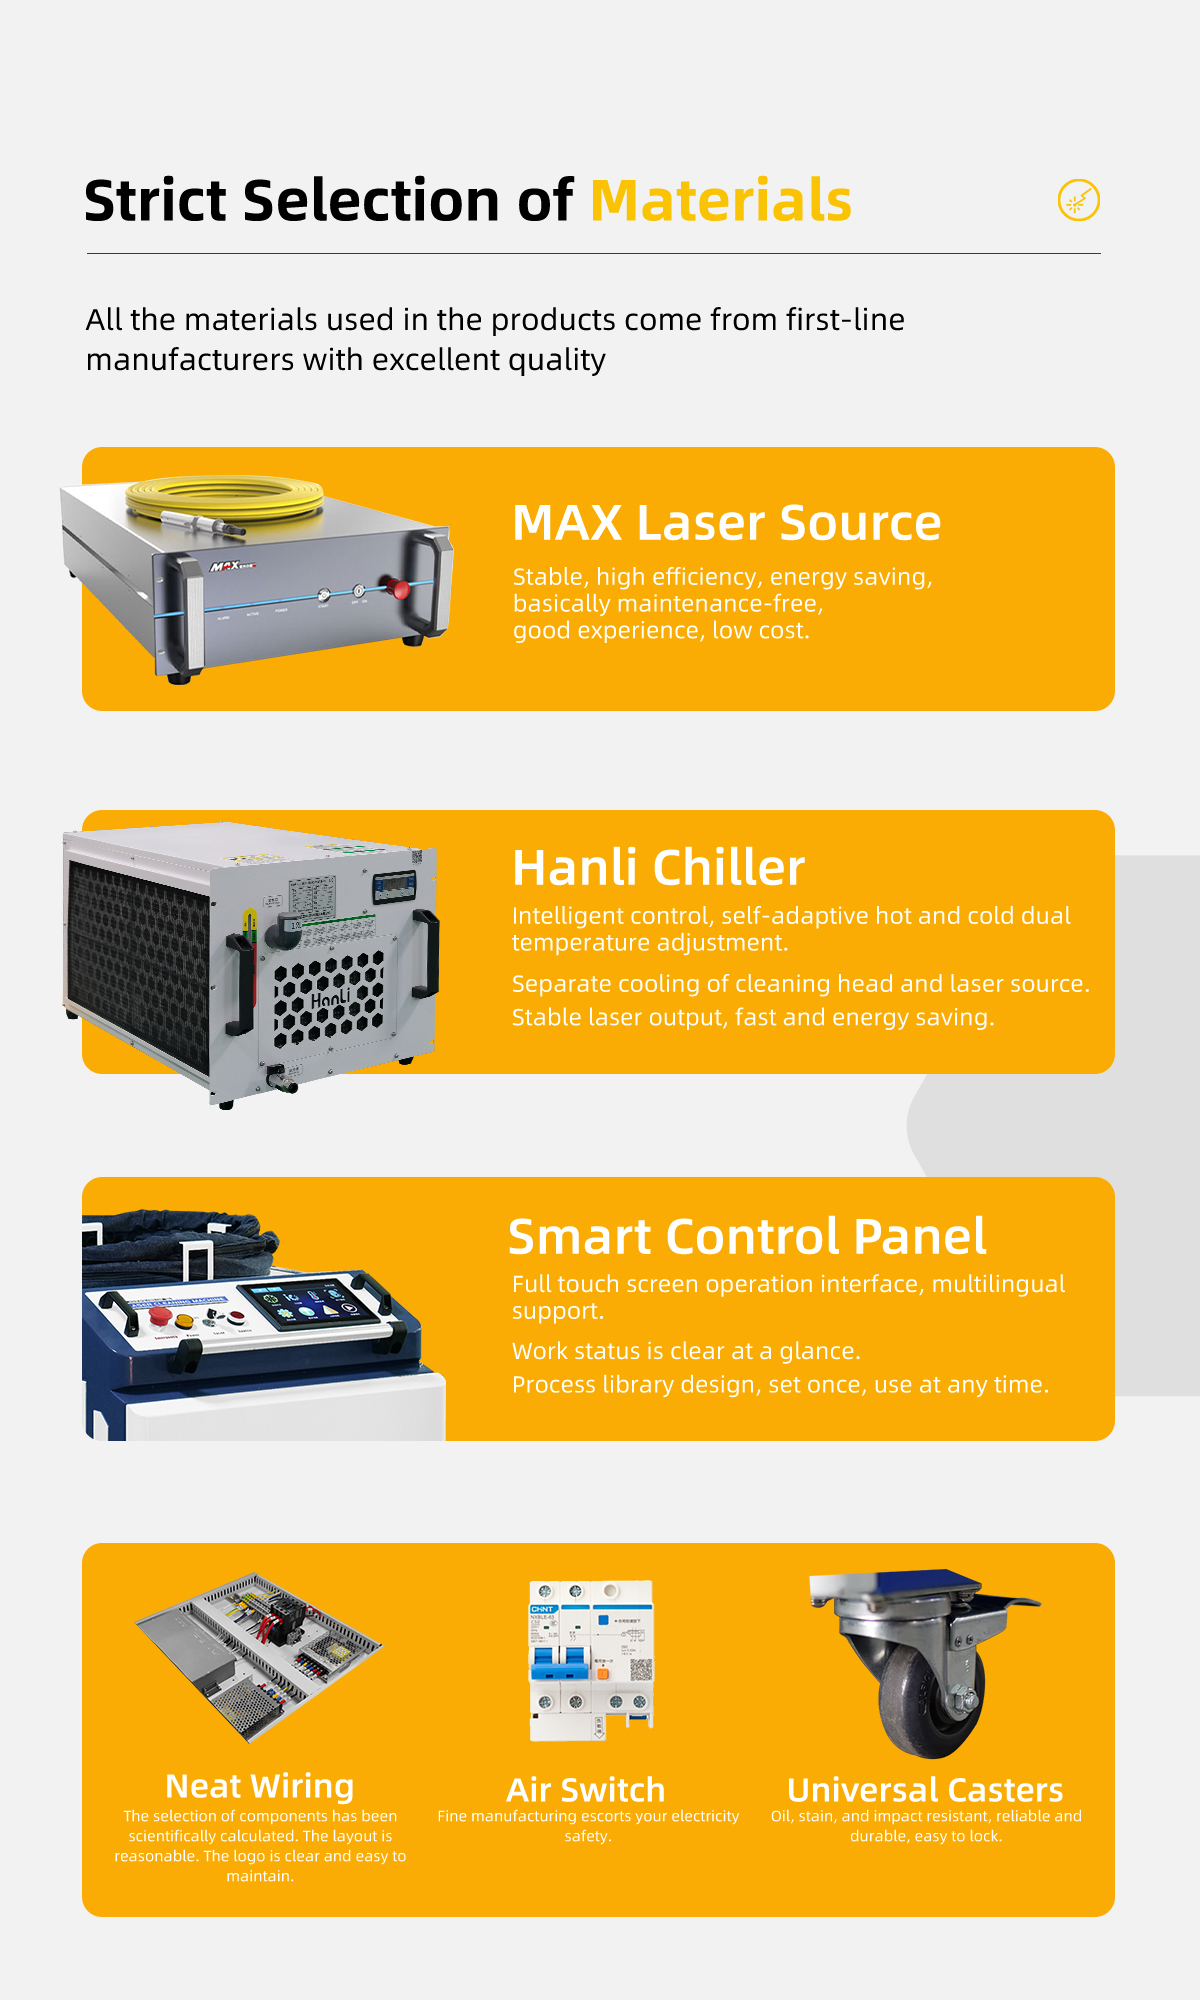 1500watt Laser Cleaning Machine Metal Rust Remover Air Shipping Fiber Laser Cleaner Rust Removal 1500watt Laser Cleaning Machine Metal Rust Remover Air Shipping Fiber Laser Cleaner Rust Removal sfx laser,laser cleaner 1000w,Fiber Laser Cleaner Rust Removal Laser Cleaning Machine,portable fiber laser cleaner rust removal,laser cleaning machine 1000w price,metal rust removal laser cleaning machine,1500watt Laser Cleaner,1500w Laser Clening Machine